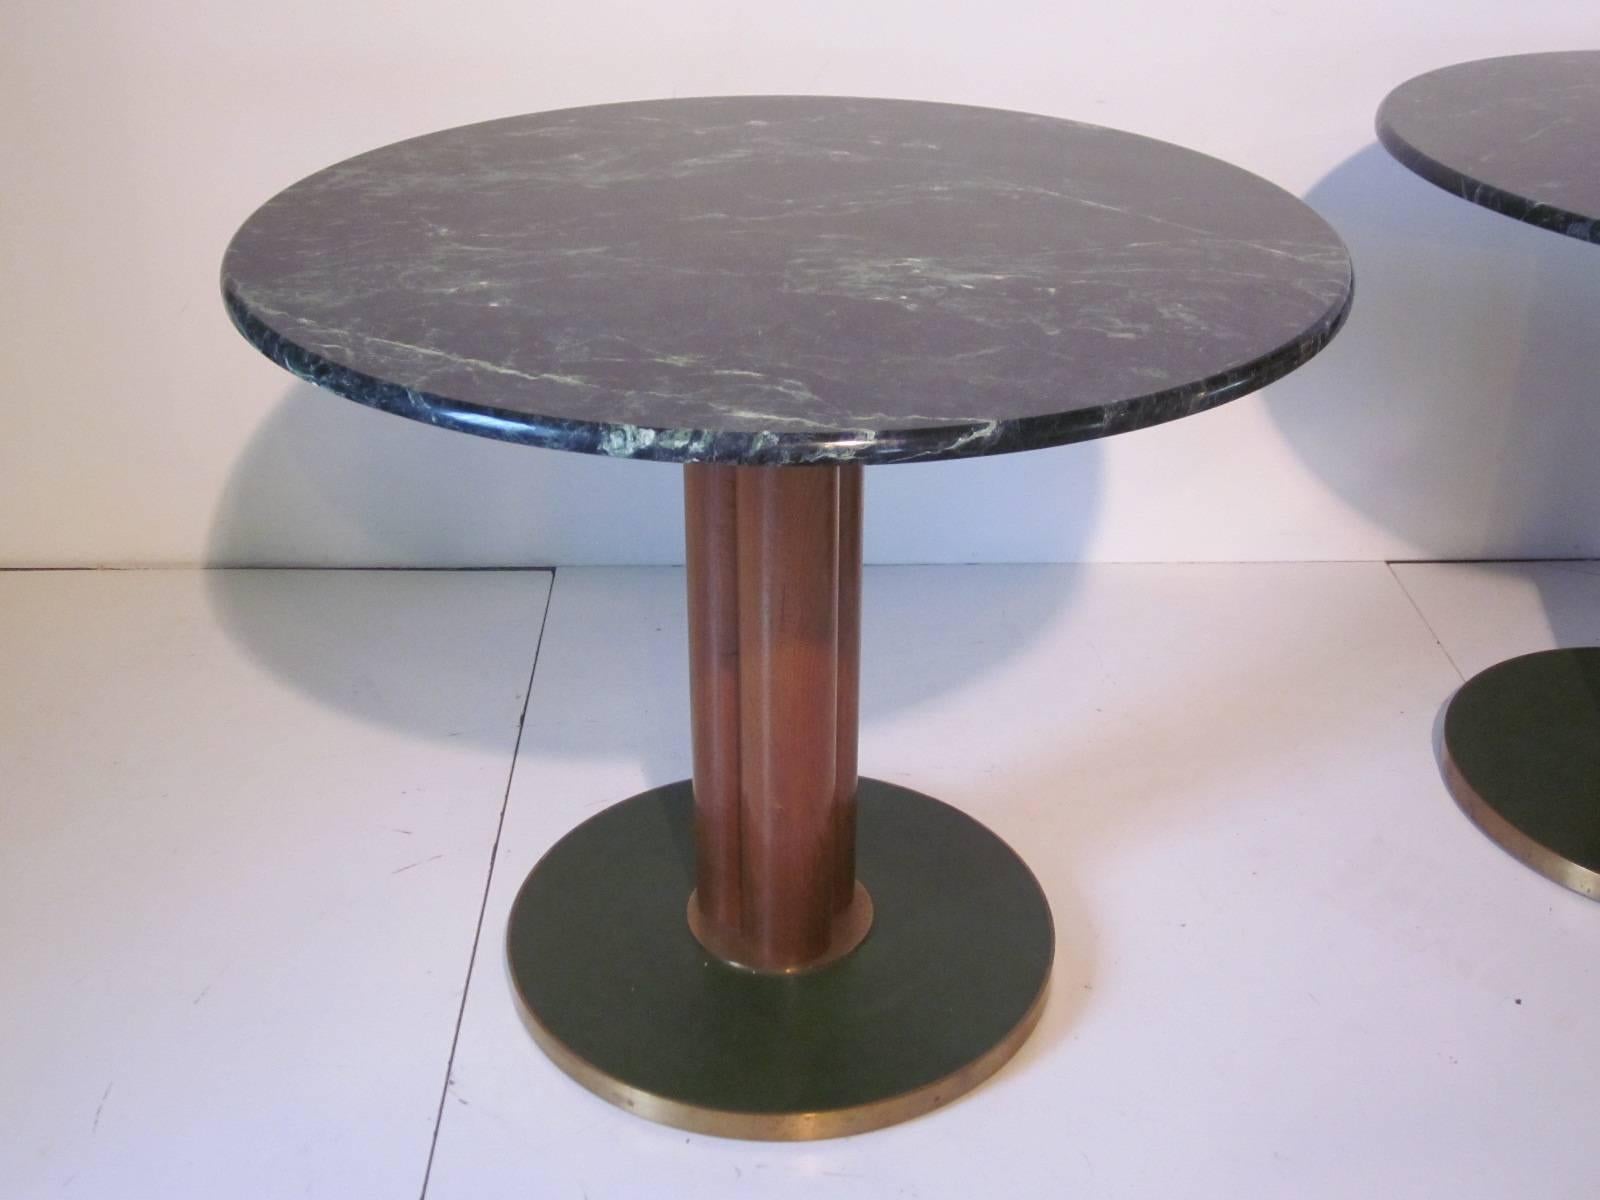 Striking green marble game or dining tables sitting on mahogany tri columned pedestals with green leather and brass trimmed bases. An elegant design from the master of taking the characteristics of the designs from the past and simplifying them into